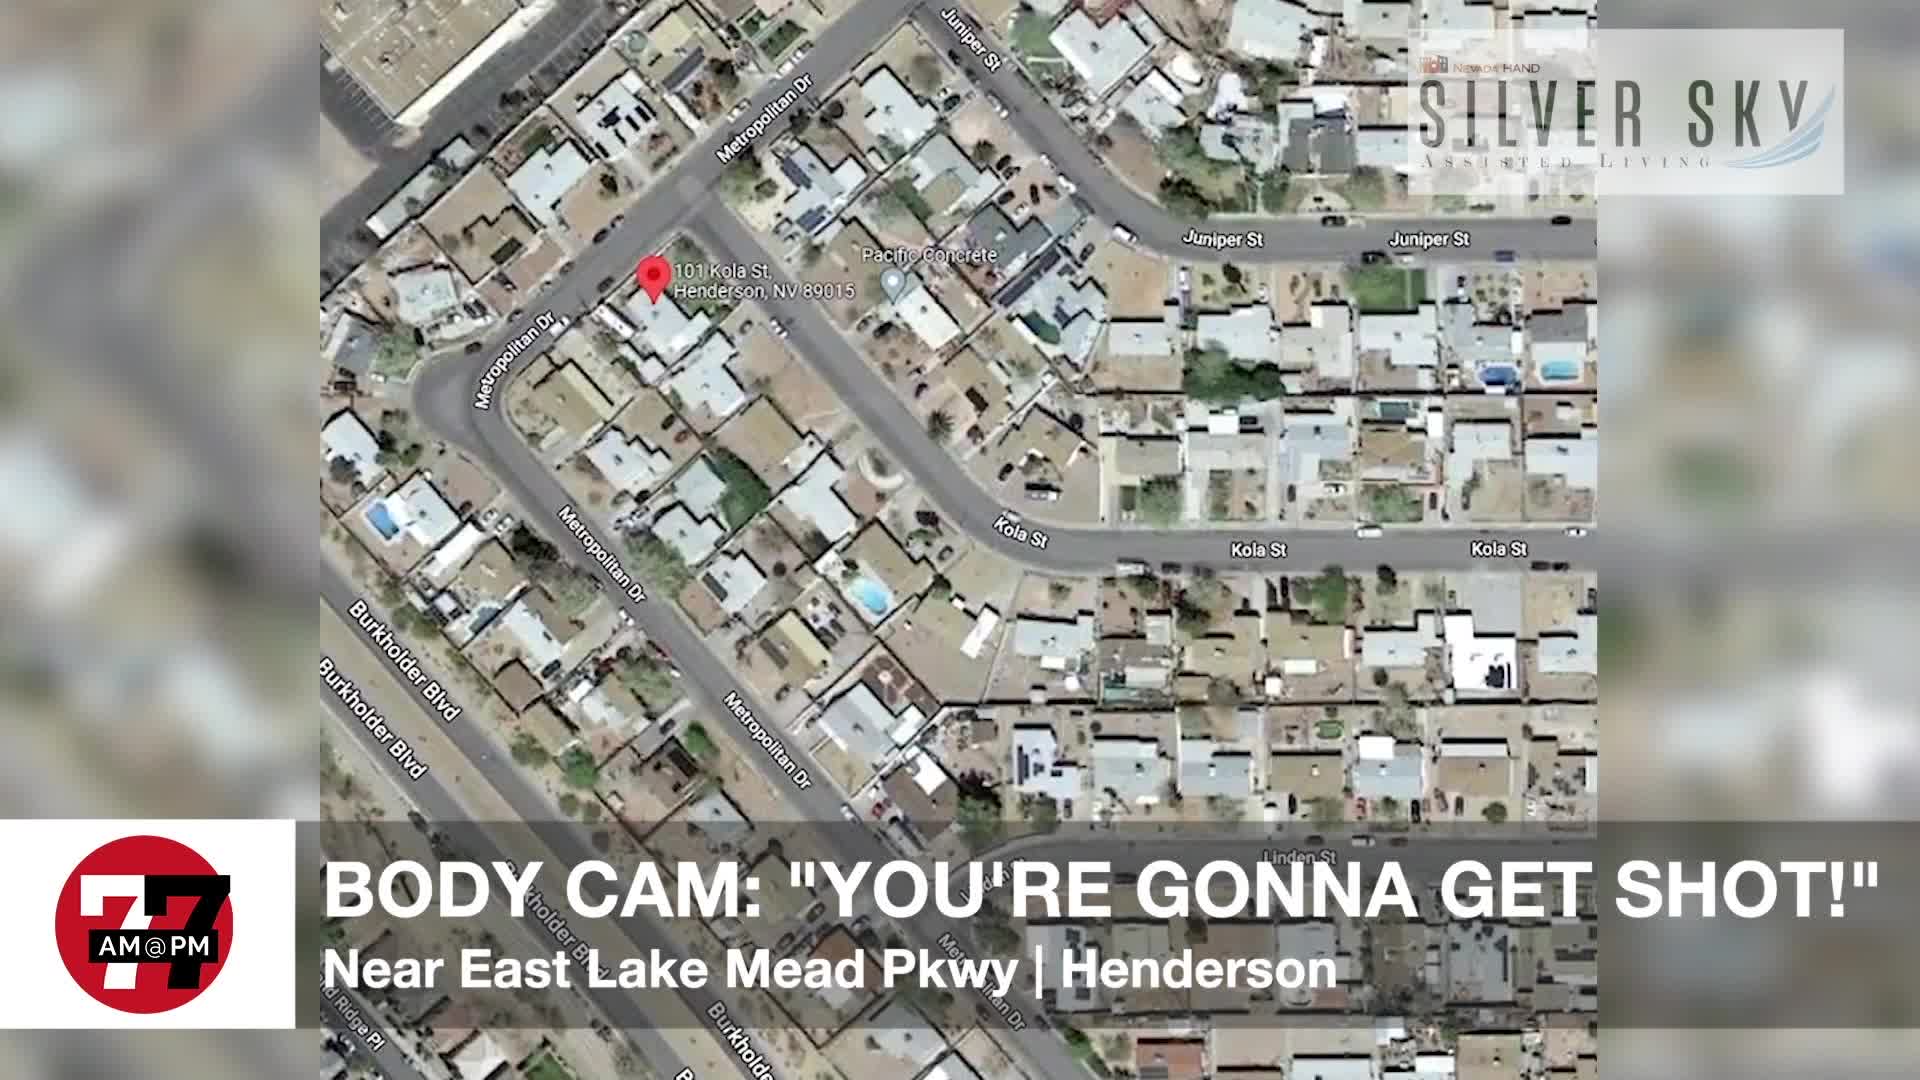 Body cam: "You're gonna get shot!"